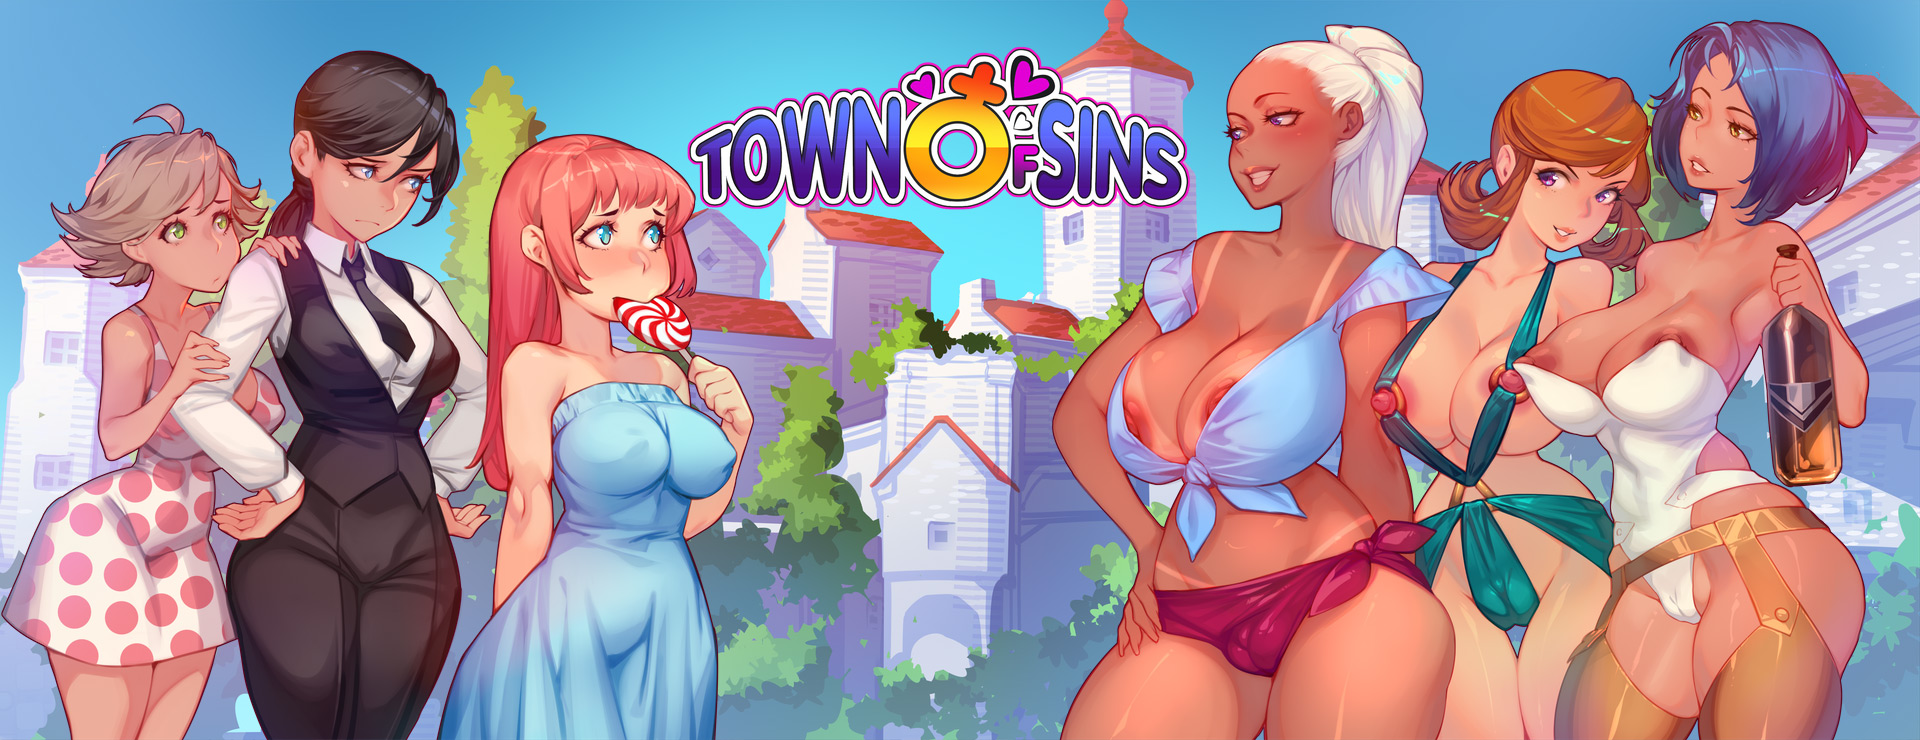 Town of Sins . - Karty